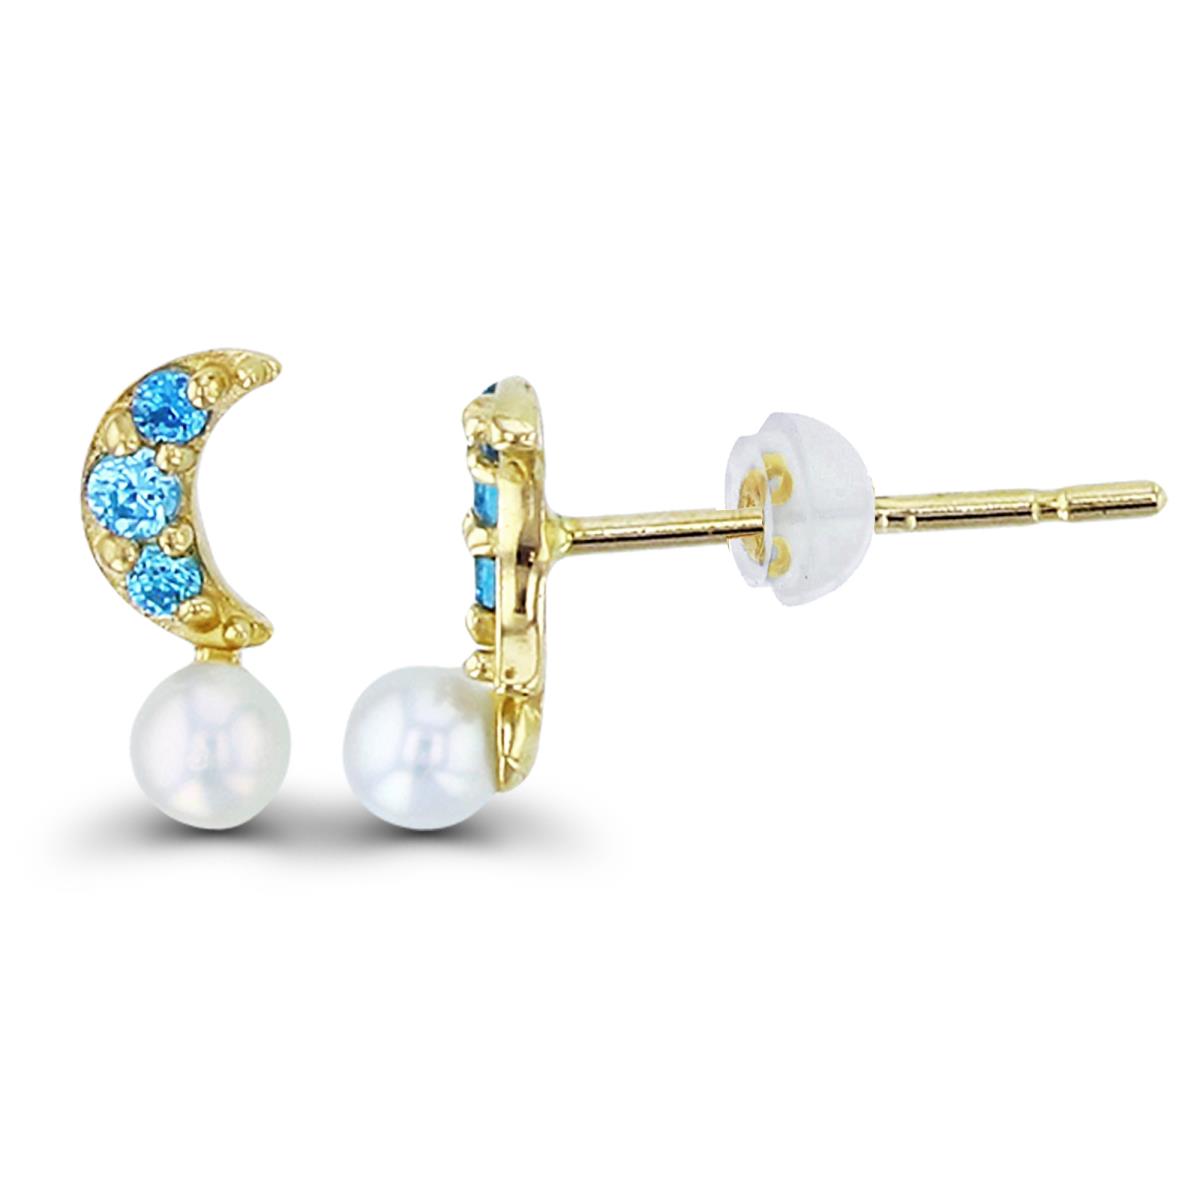 14K Yellow Gold 2.5mm Rnd Fresh Water Pearl & Rnd Blue Topaz Croissant Studs with Silicon Backs